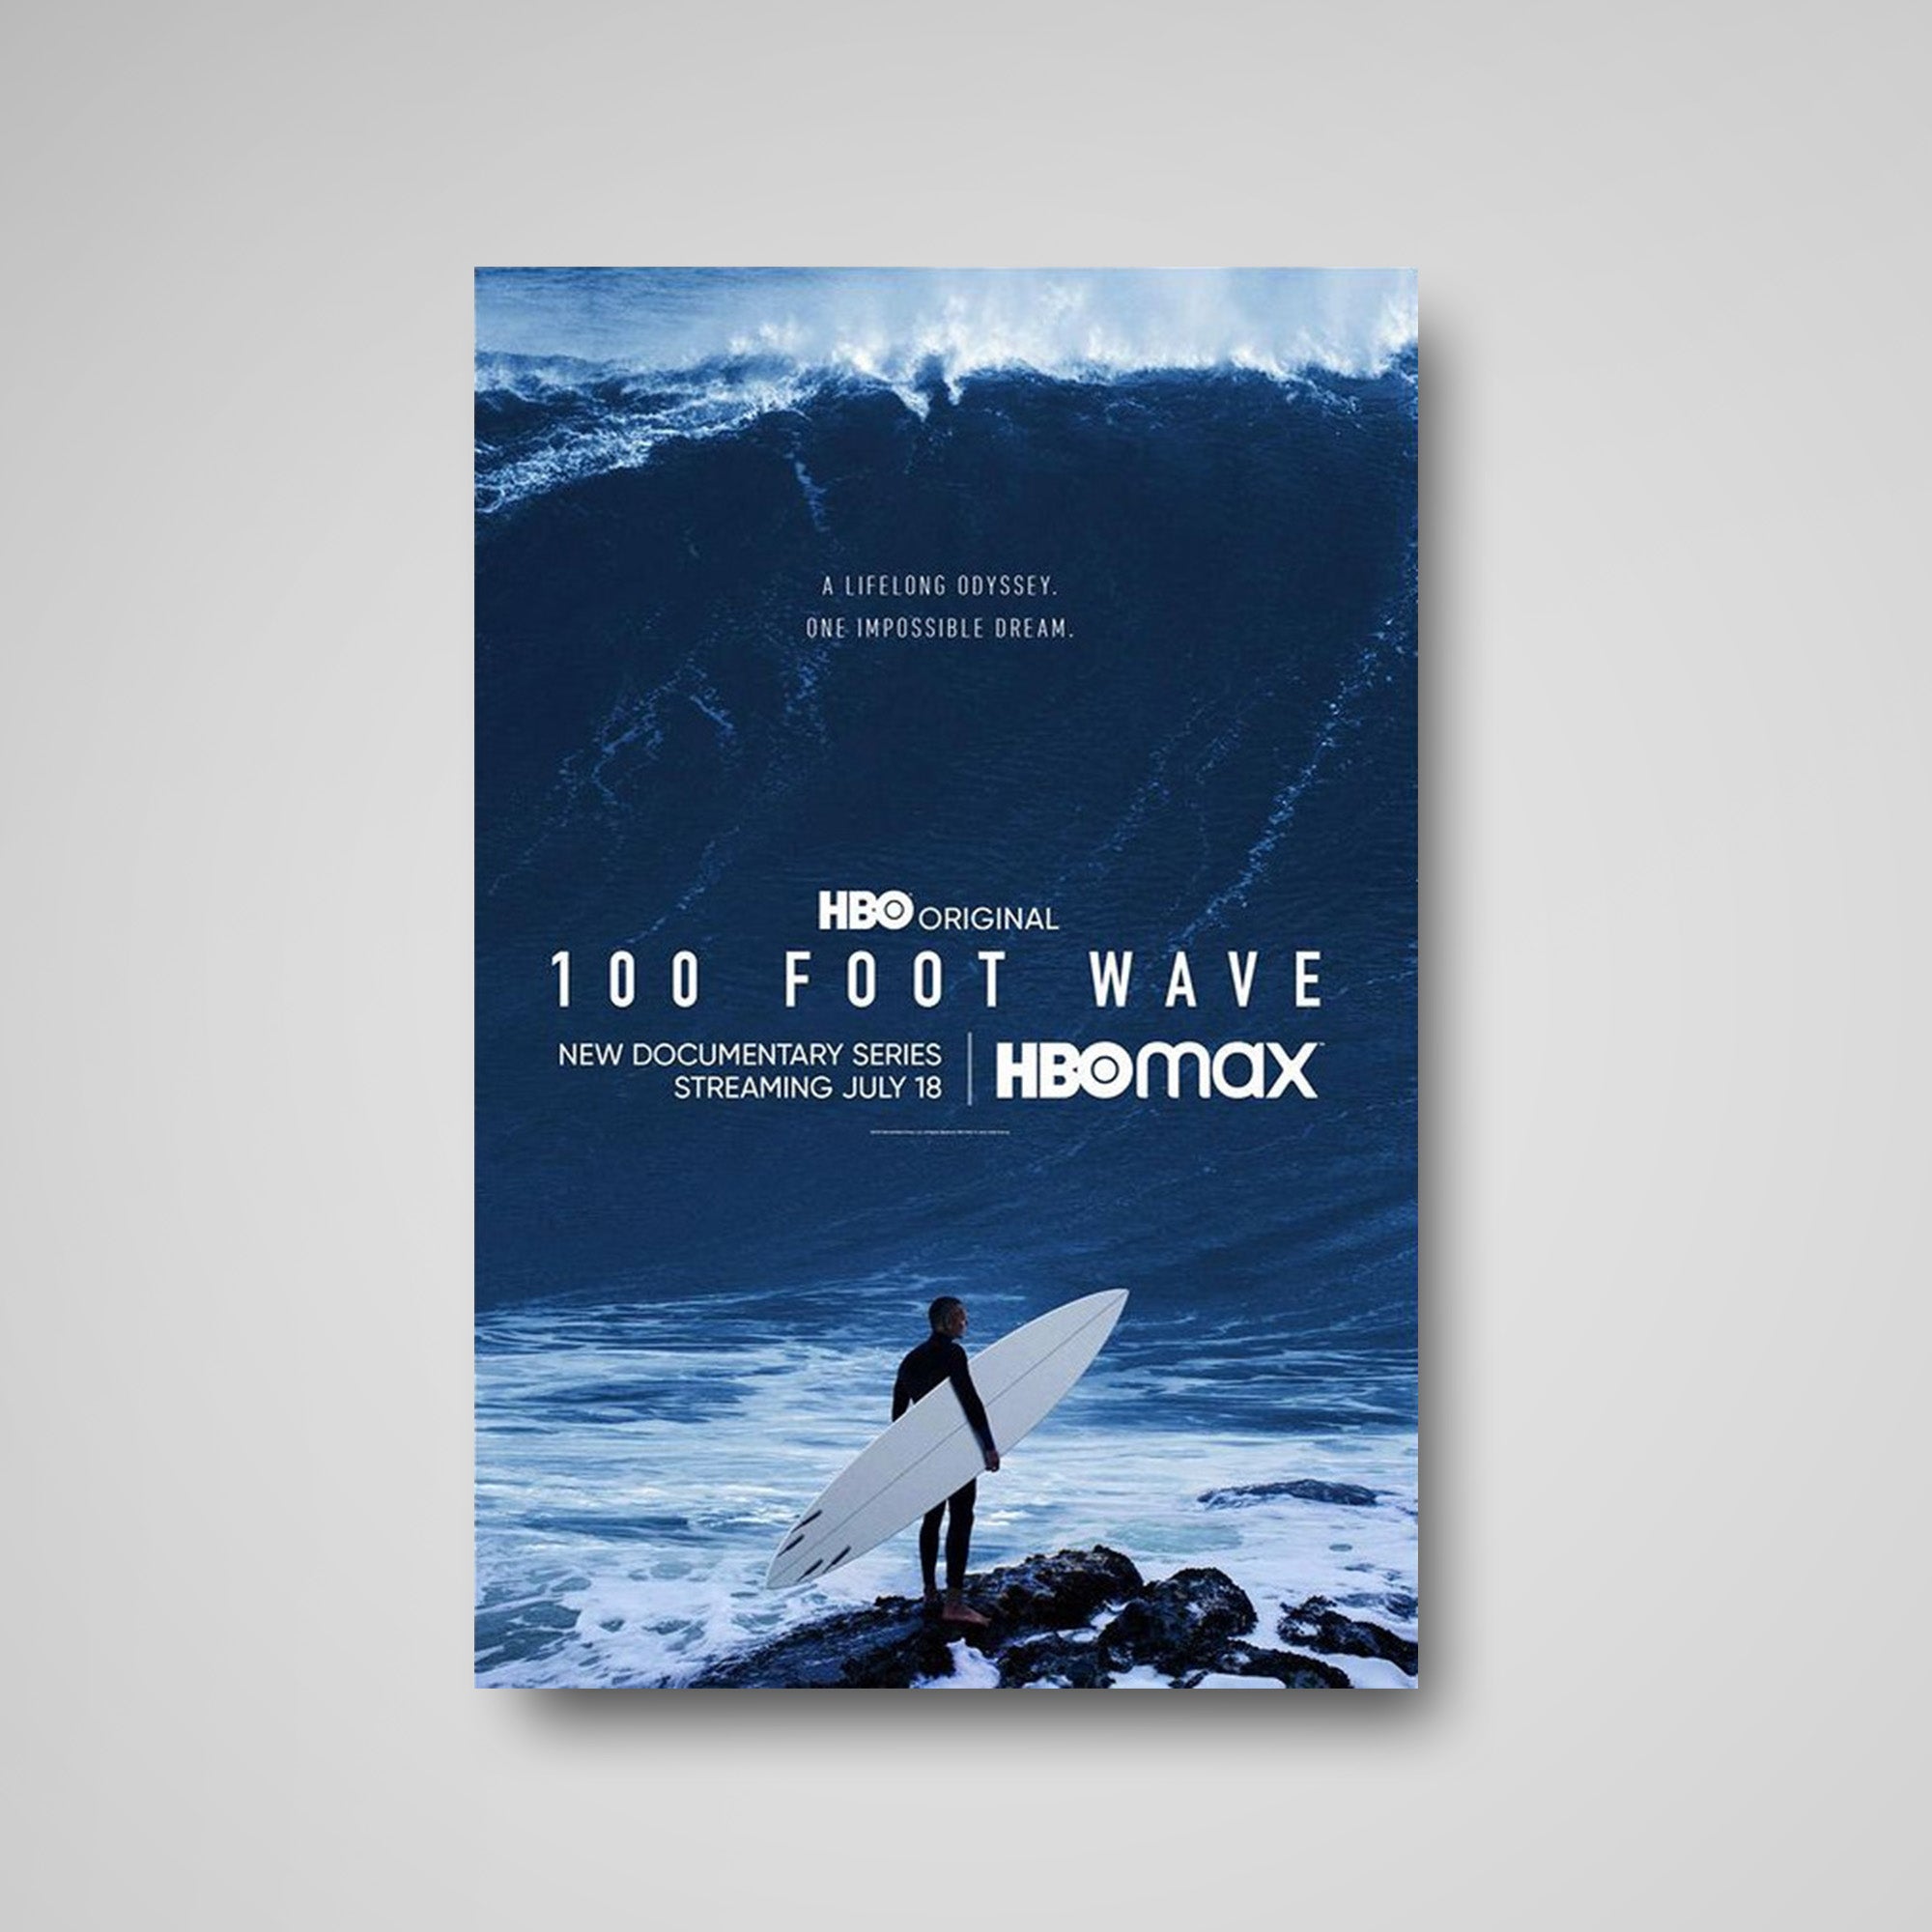 HBO’s 100 Foot Wave